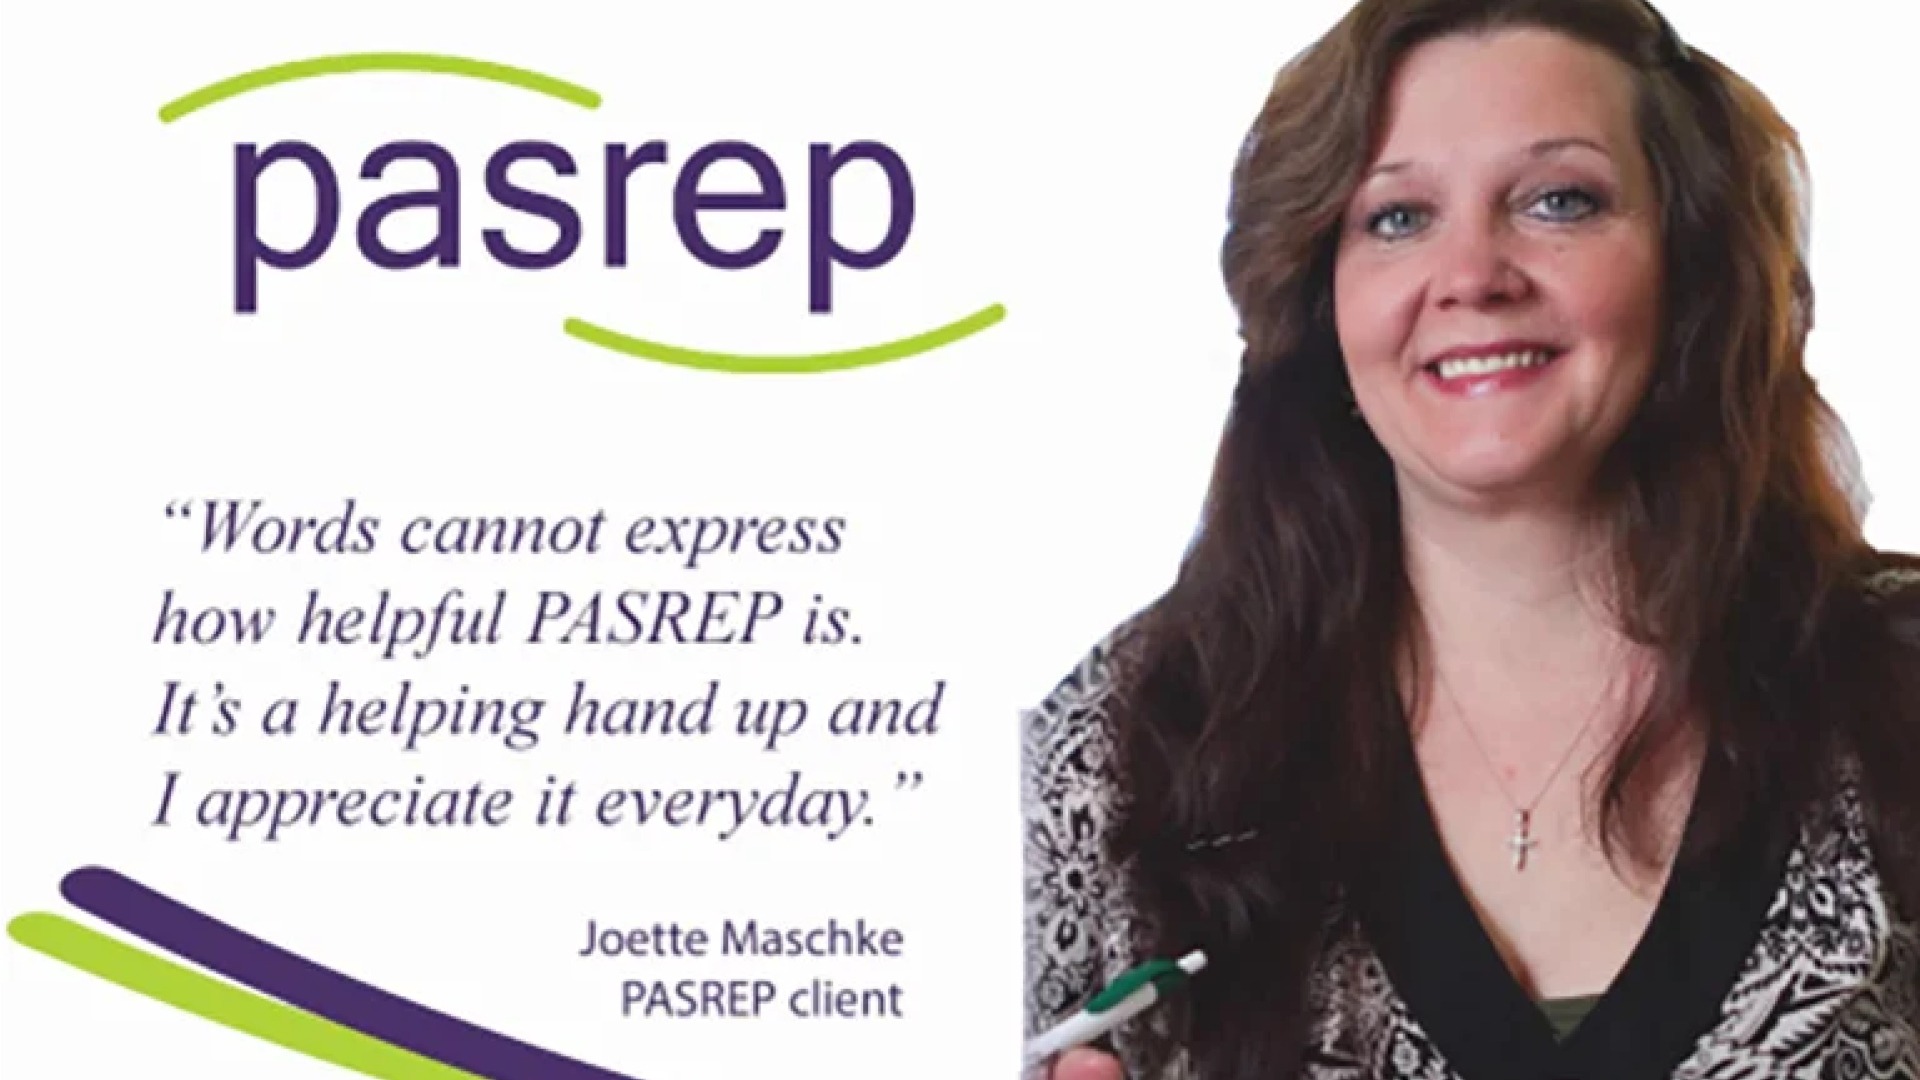 PASREP testimonial image of woman saying "Words cannot express how helpful PASREP is. It's a helping hand up and I appreciate it everyday. -Joette Maschke PASREP client